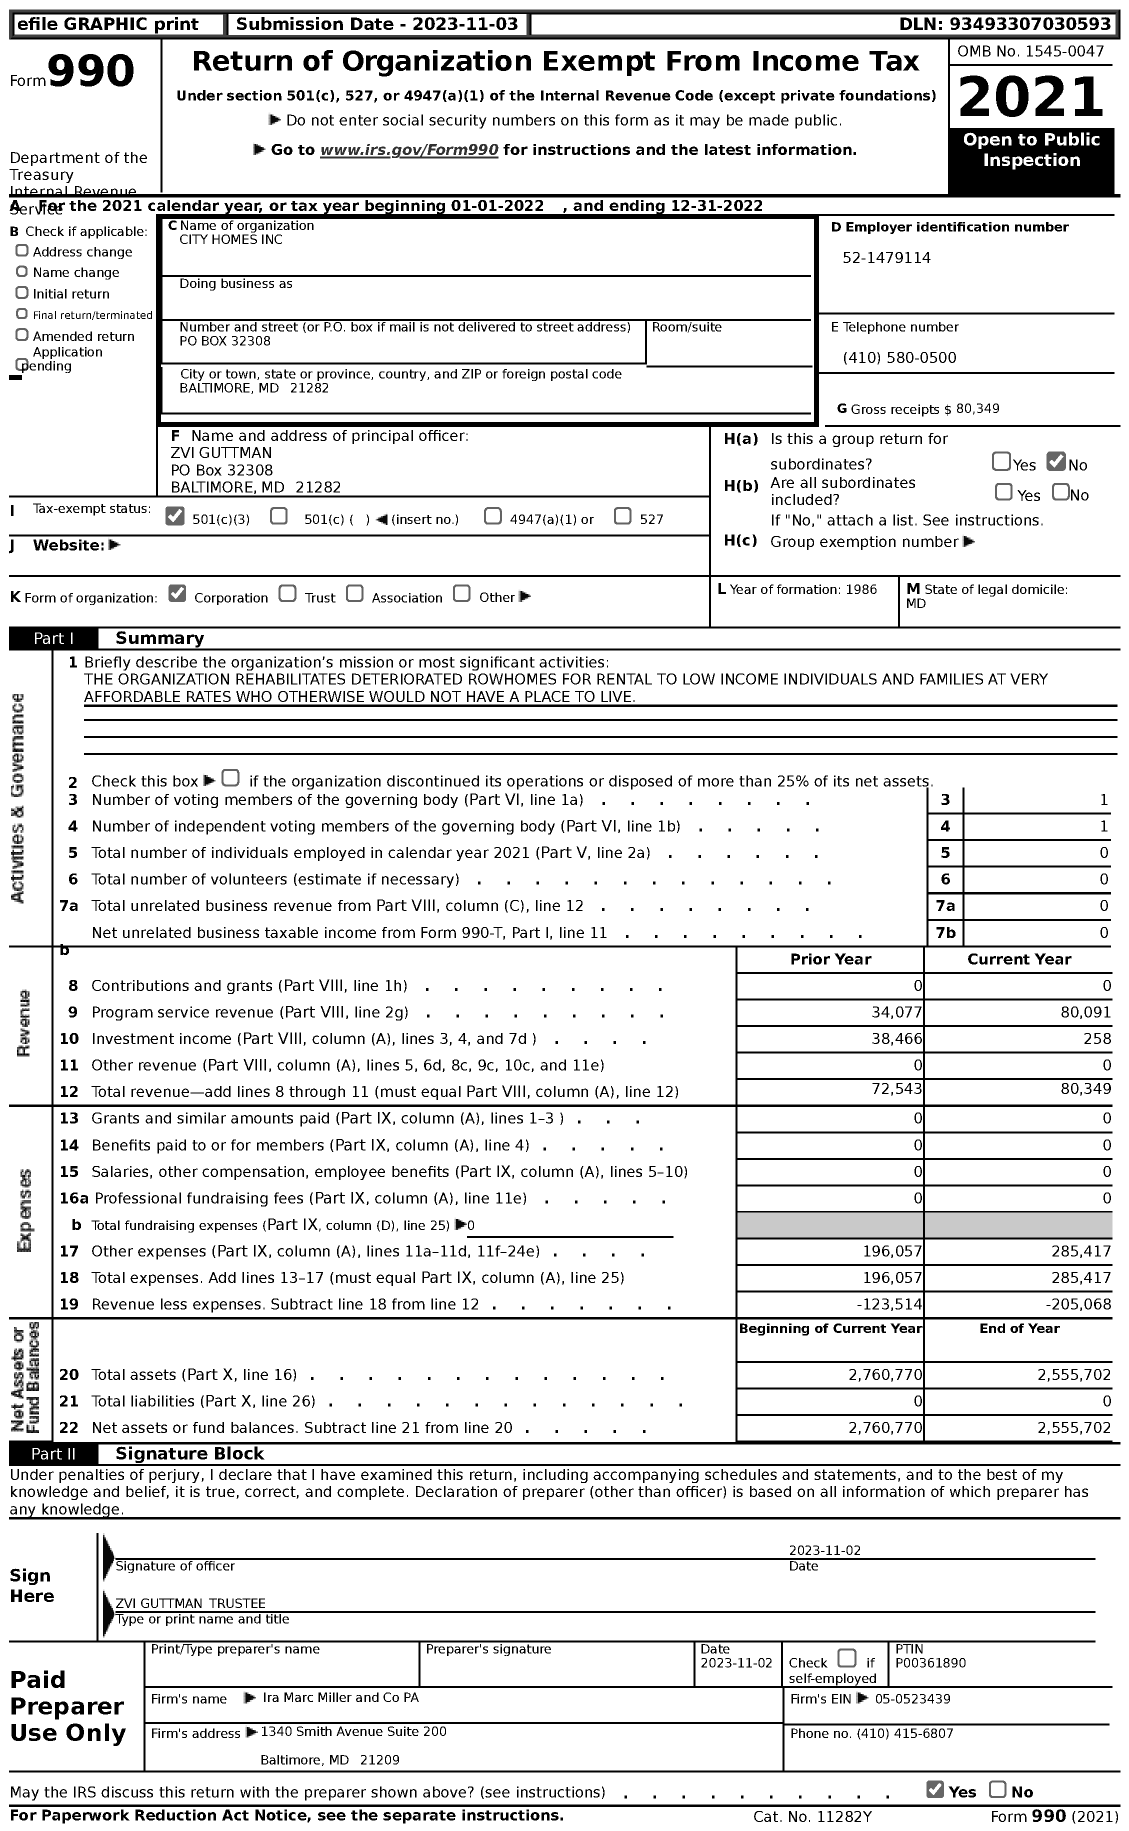 Image of first page of 2022 Form 990 for City Homes